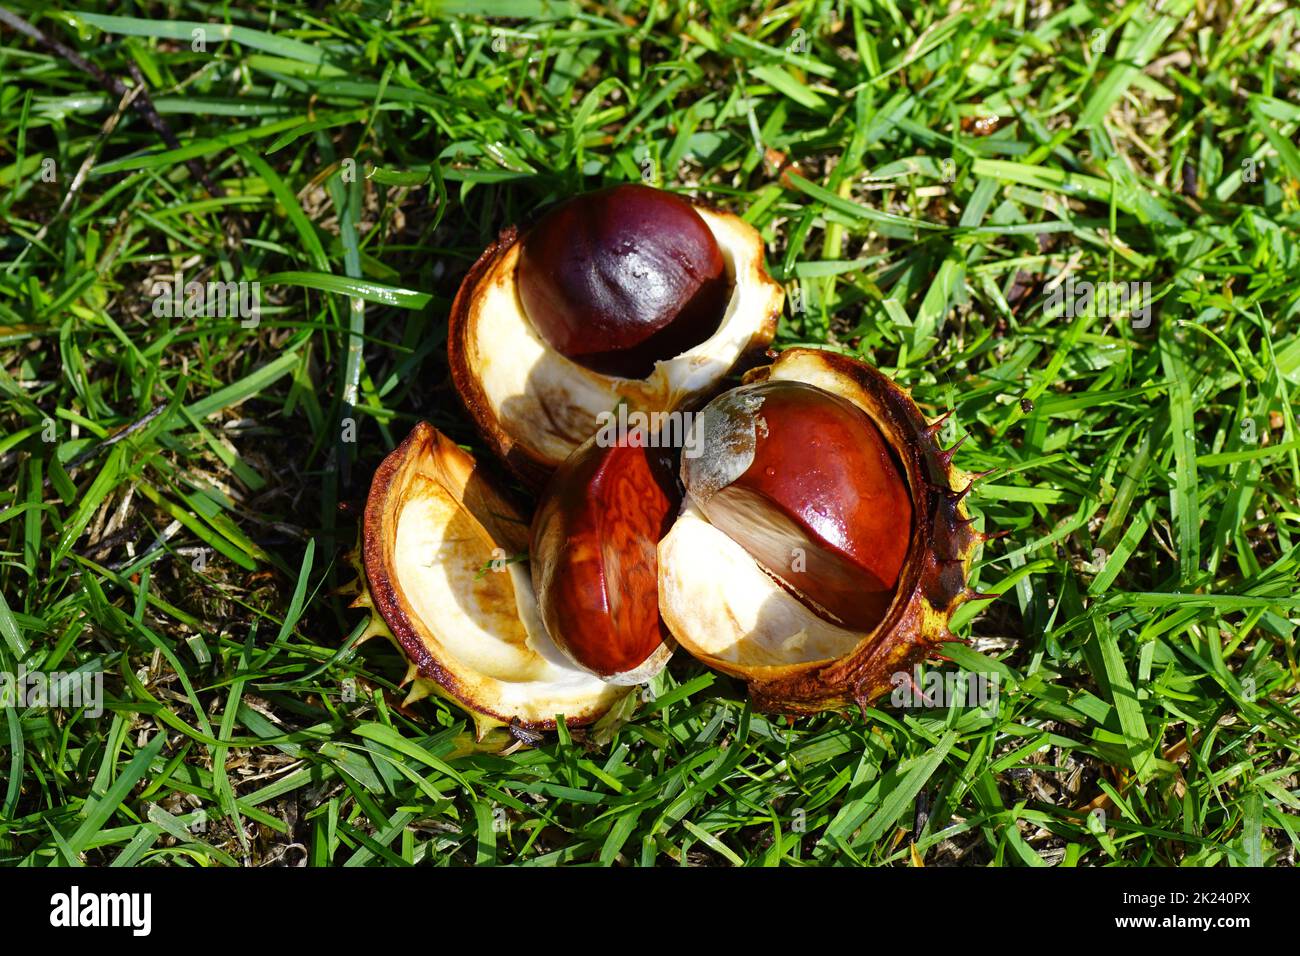 Common horse chestnut (Aesculus hippocastanum), chestnut with husk. In the grass of the lawn of in a Dutch garden in September. Netherlands Stock Photo